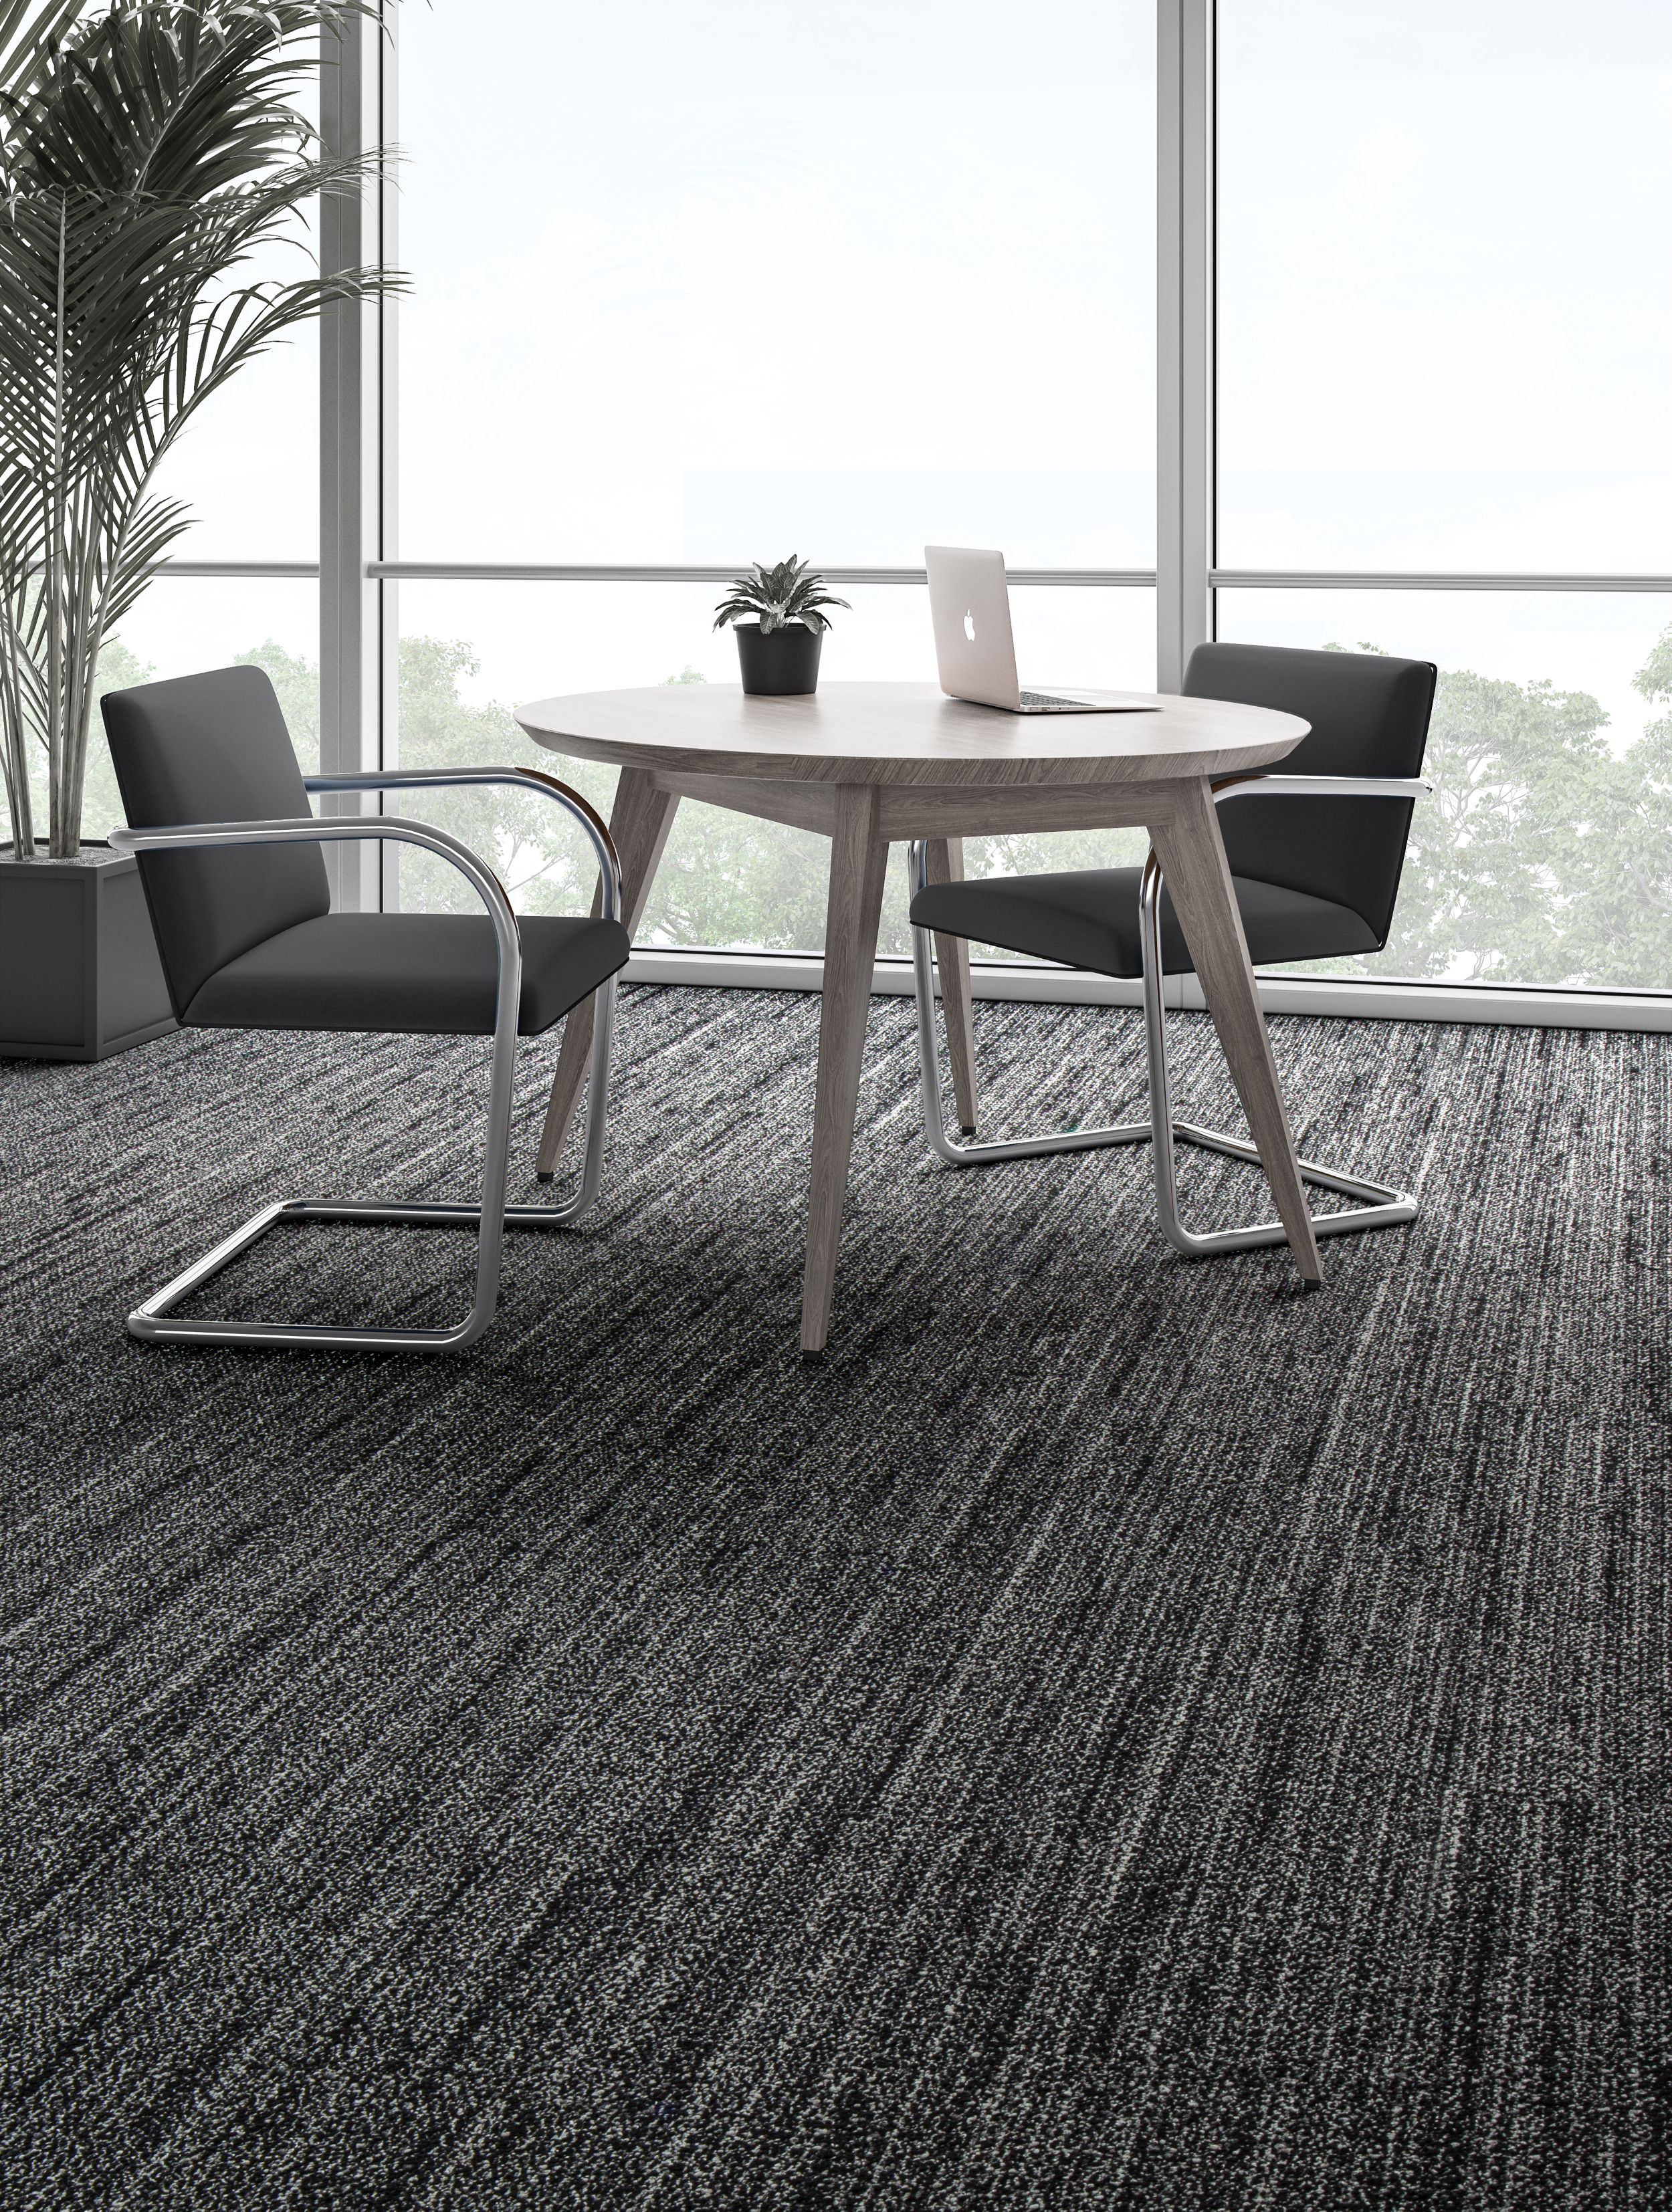 Interface WW870 plank carpet tile shown with small table and chairs Bildnummer 12